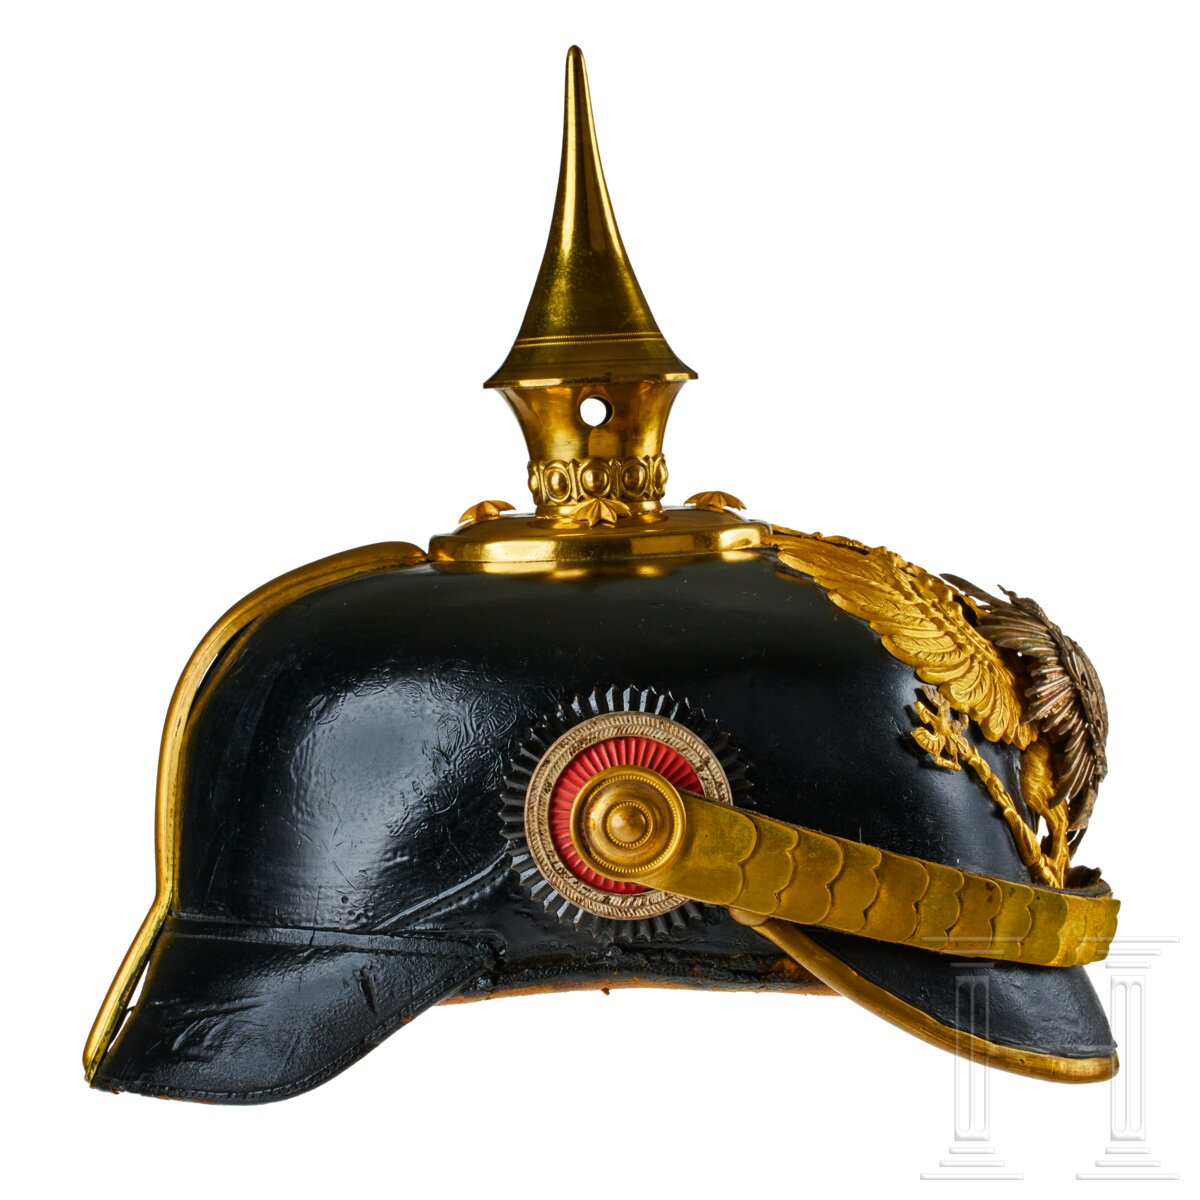 A helmet for IR 94 Saxe-Weimar Reserve Officers - Image 5 of 9